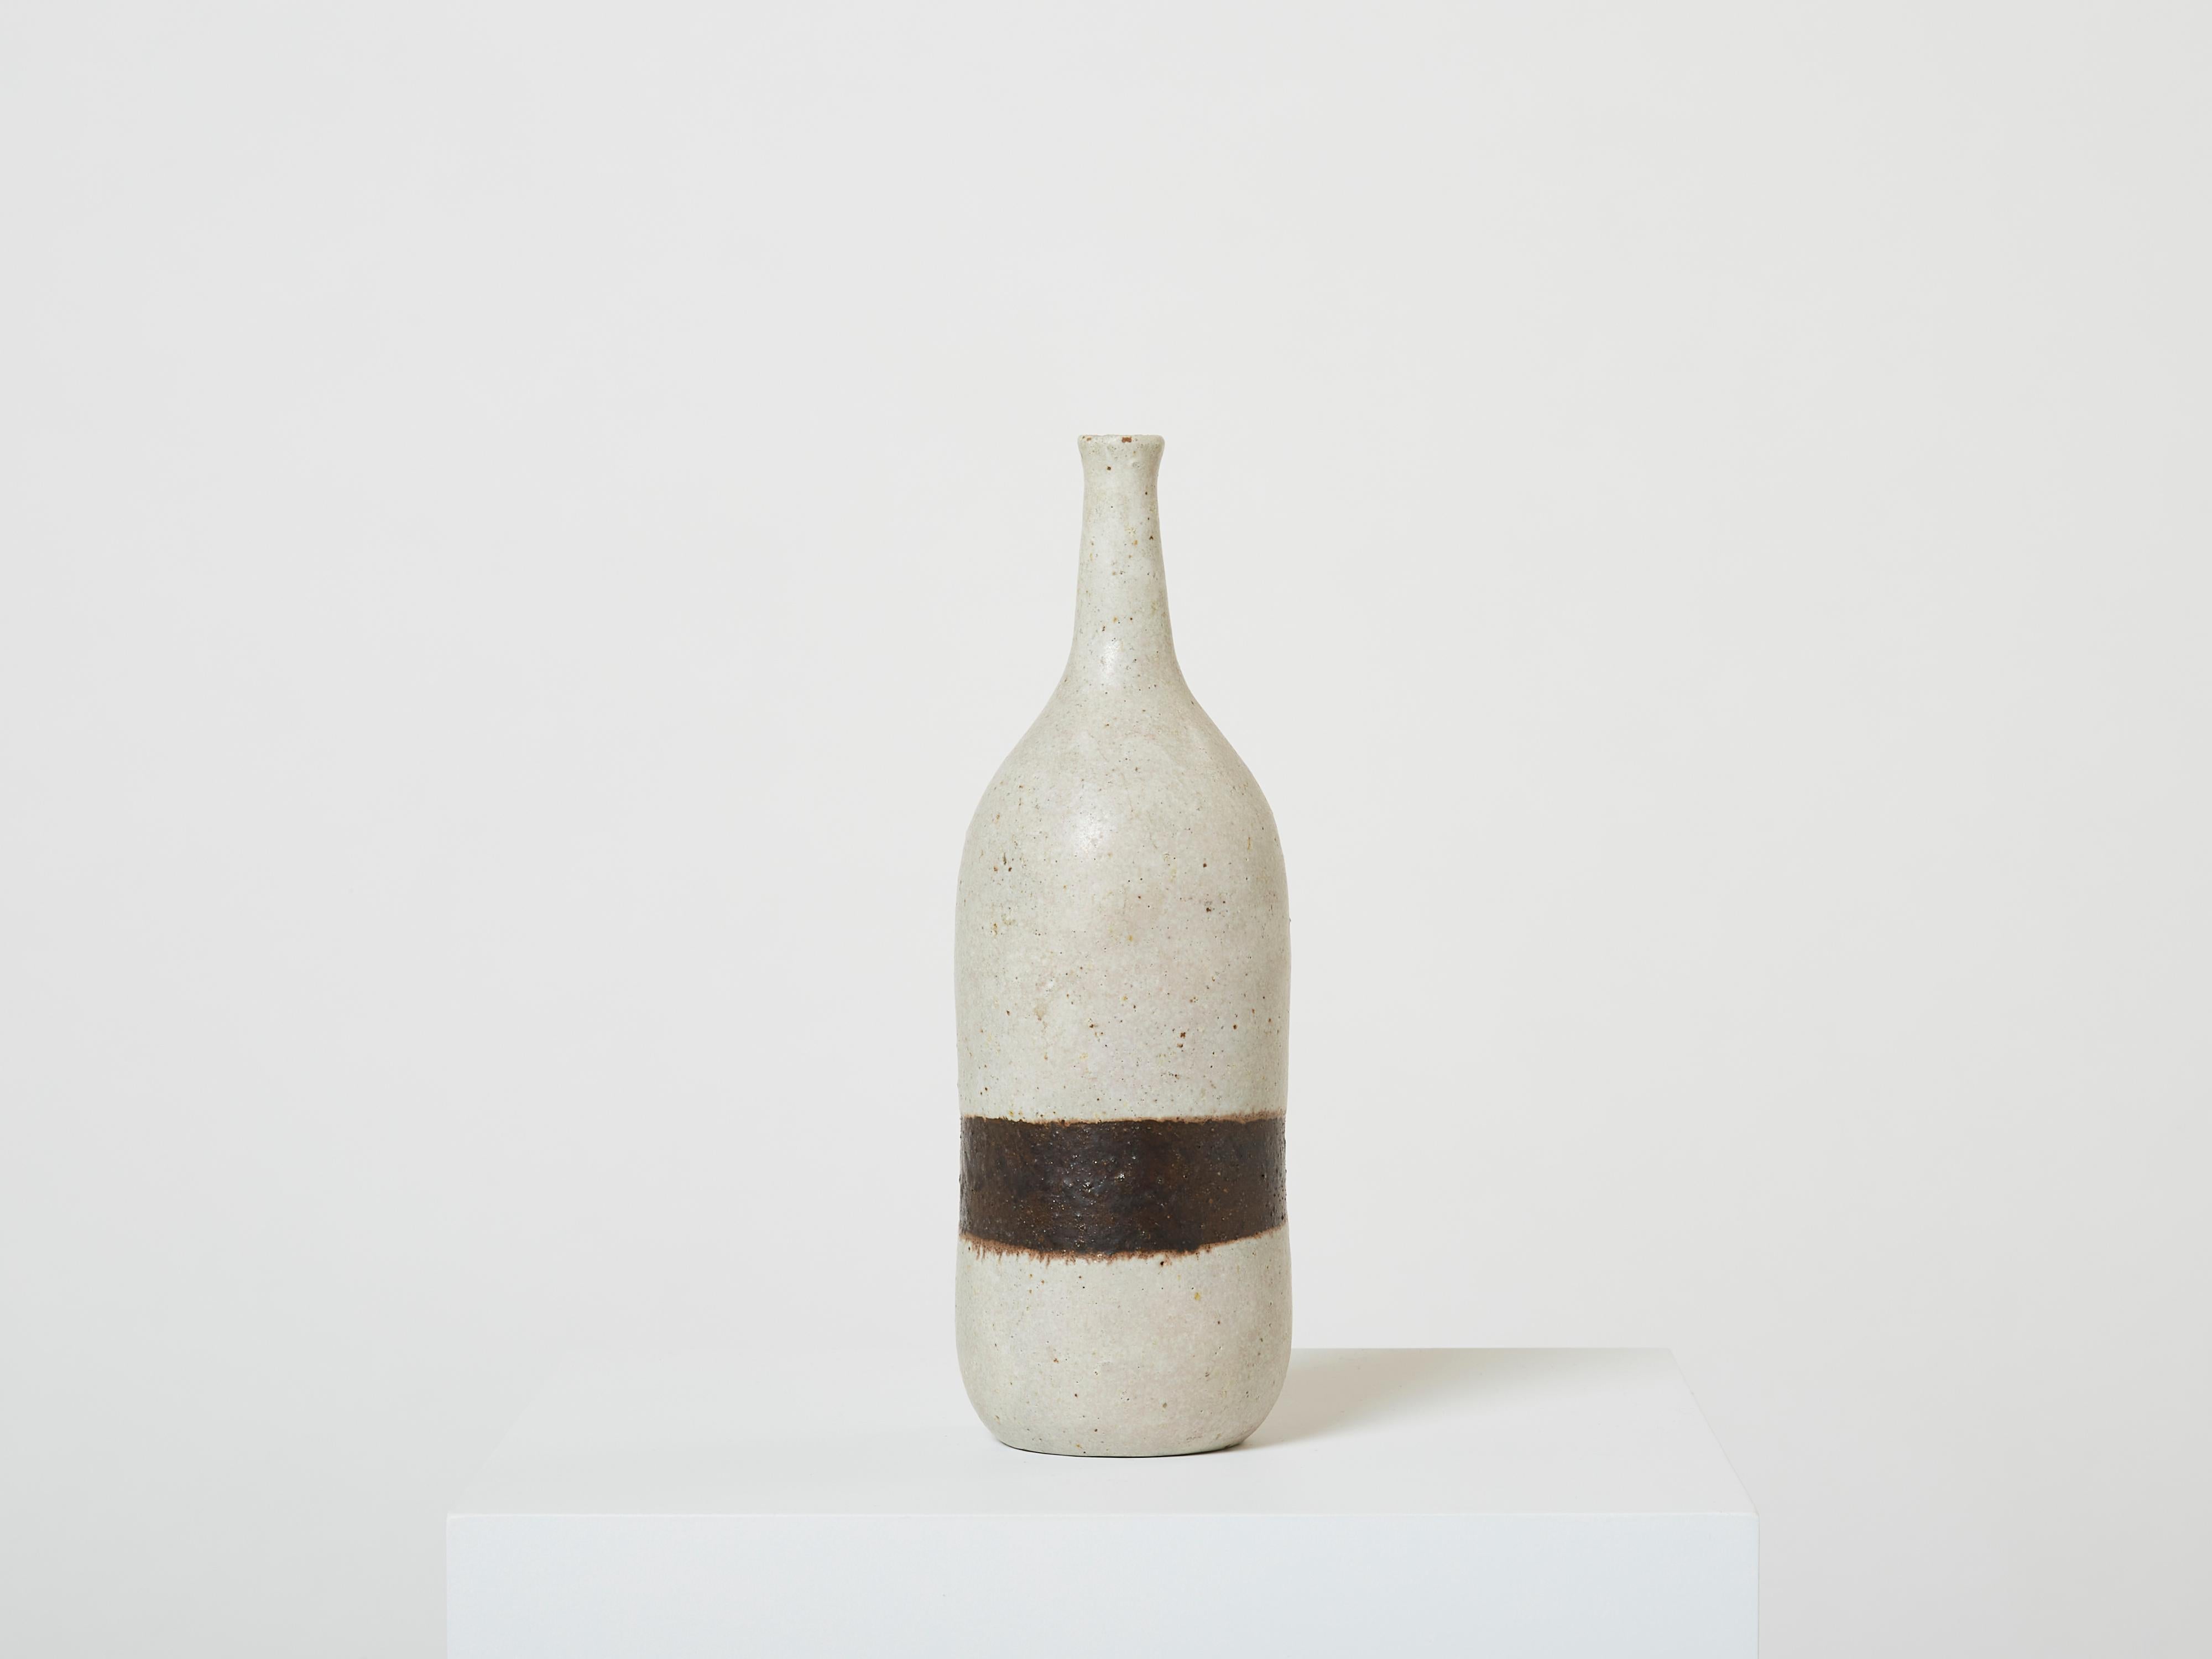 Beautiful Bruno Gambone greige glazed stoneware ceramic single flower vase, bottle shaped, made in the mid-1970s. This beautiful vase is typical of Bruno Gambone minimalistic design, with a single brown line. Bruno returned to Florence in 1969 to